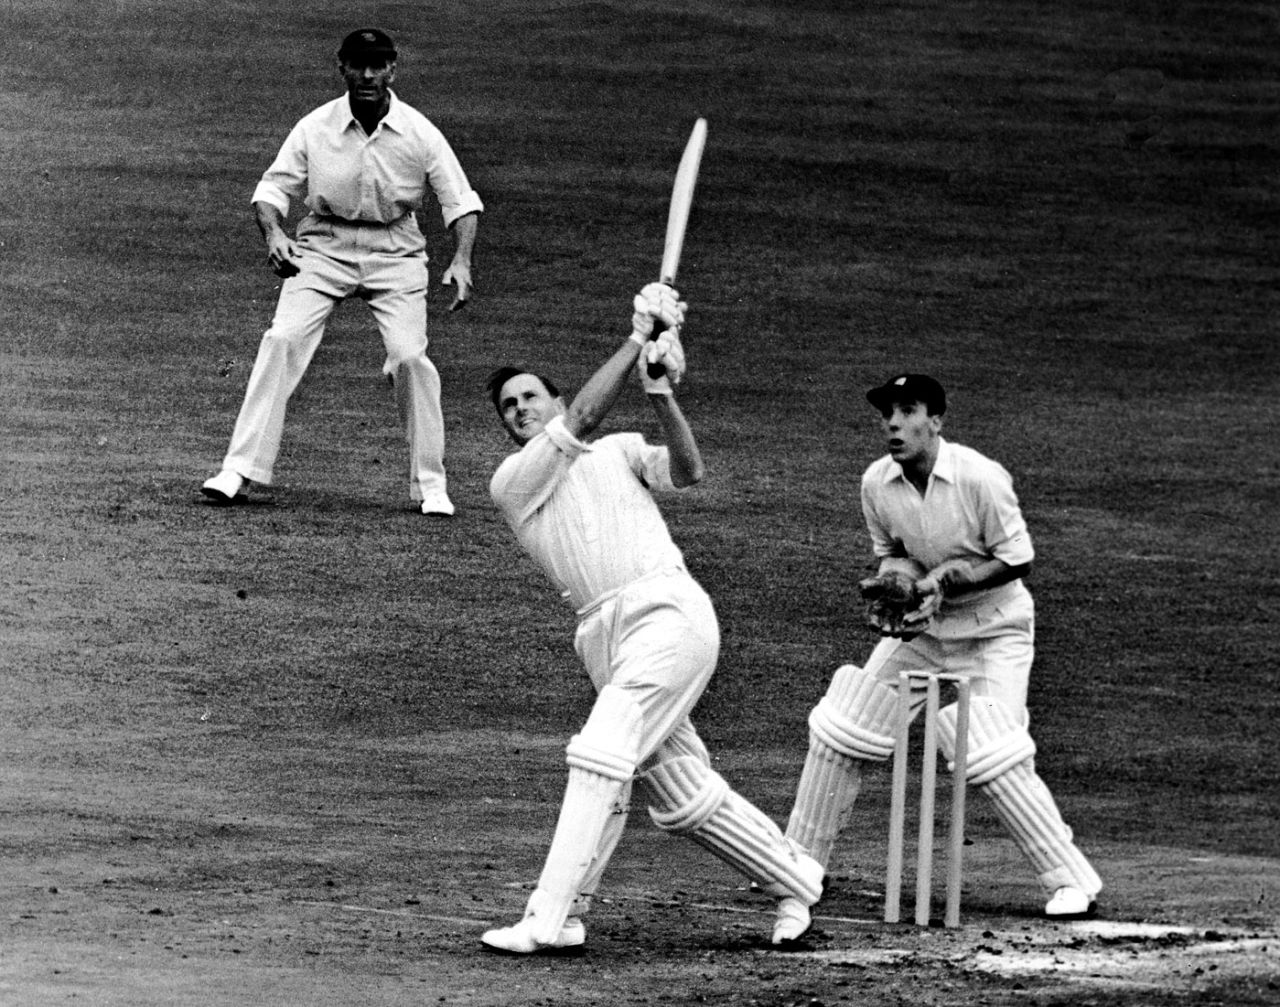 Peter May bats for Surrey, Lord's, August 17, 1957